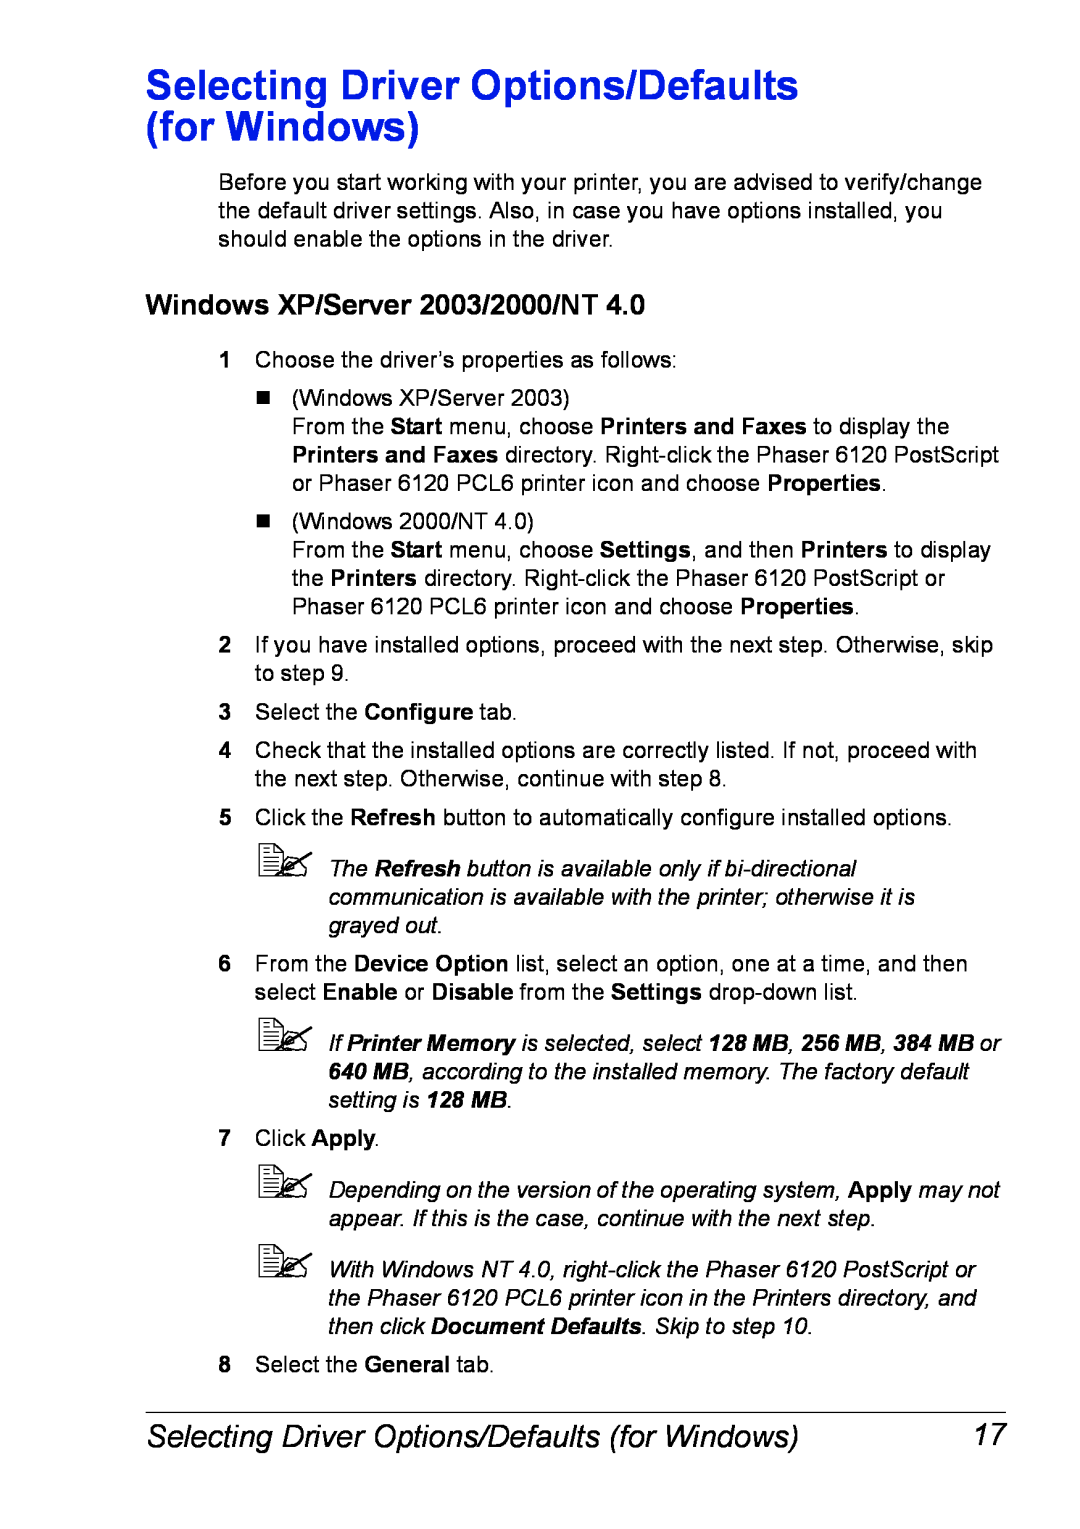 Xerox 6120 manual Selecting Driver Options/Defaults for Windows, Windows XP/Server 2003/2000/NT 